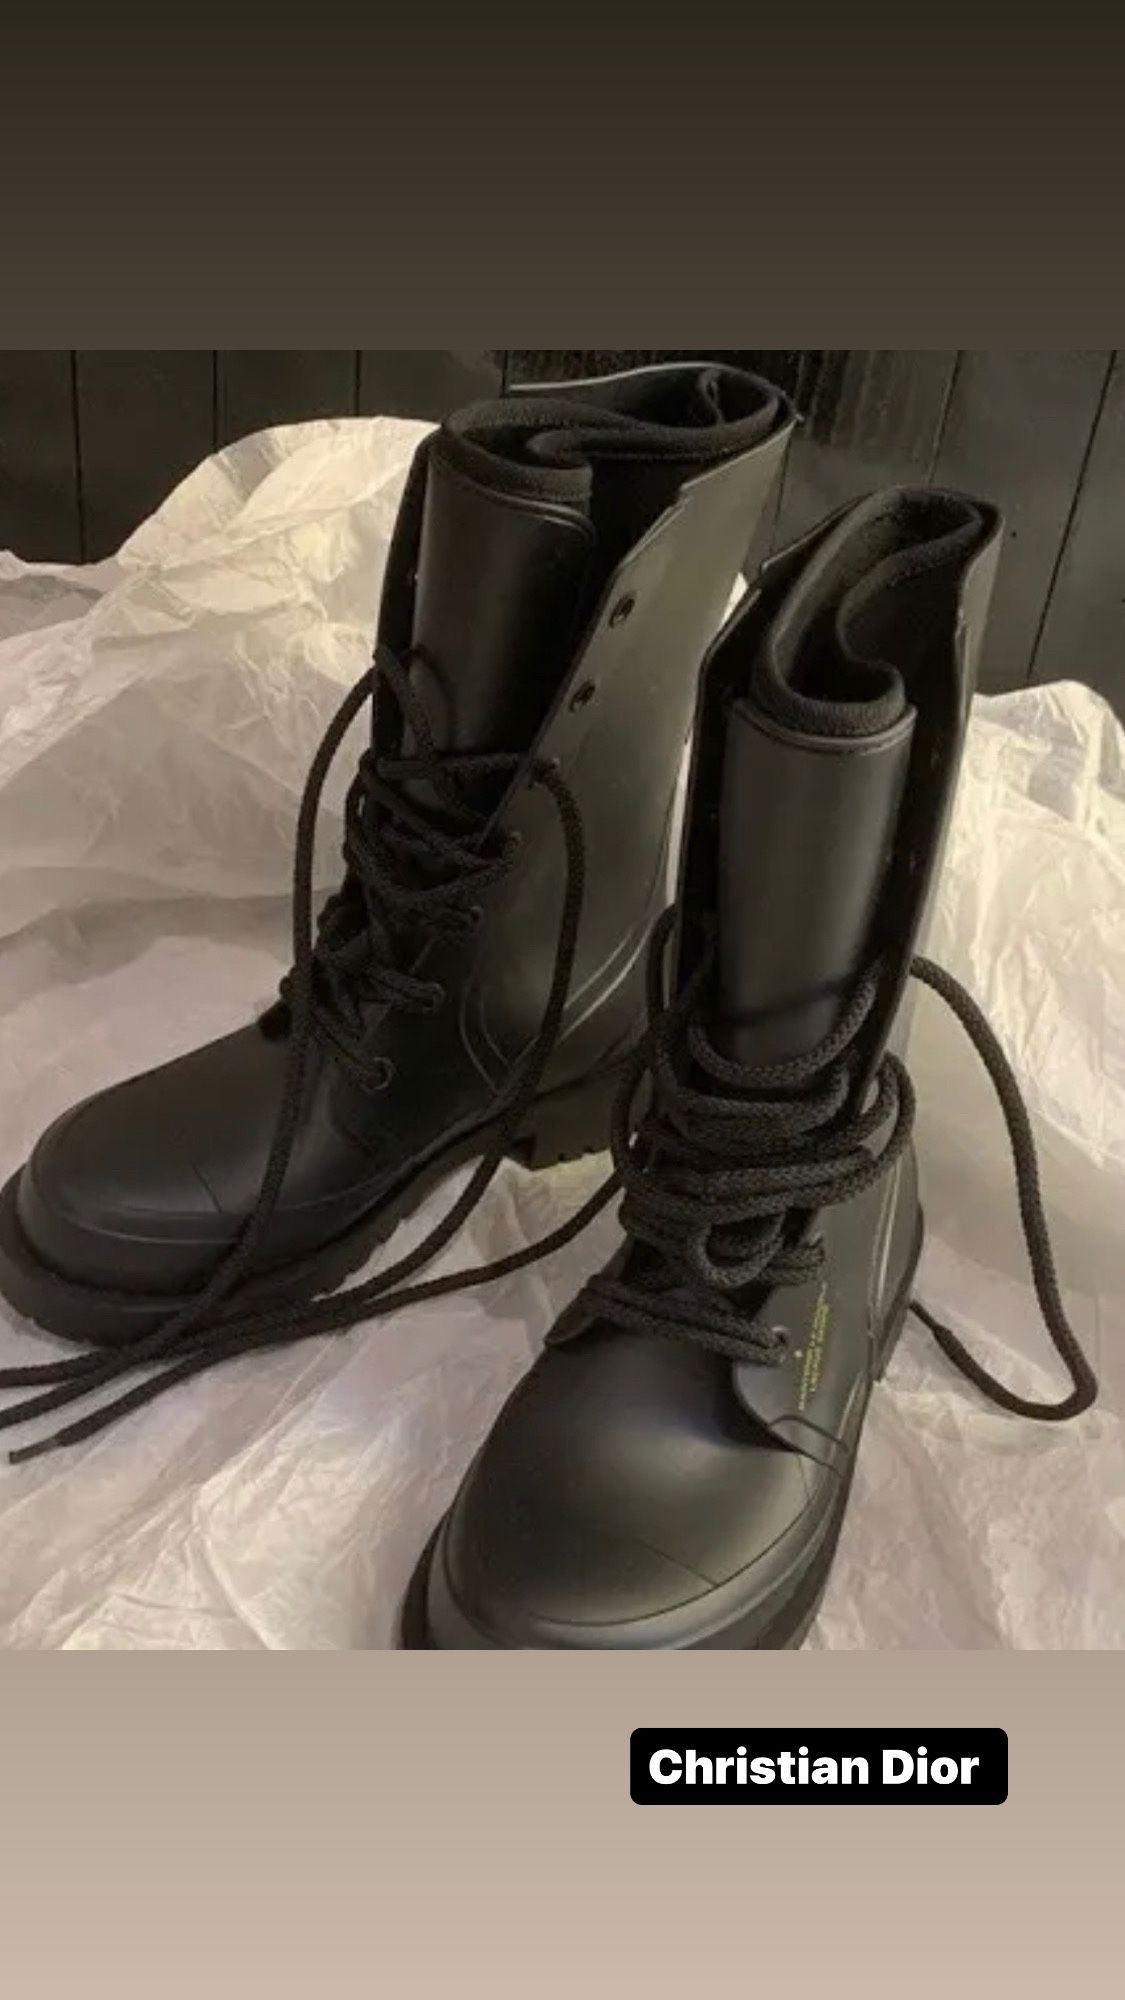 Dior Rubber Camp Boots